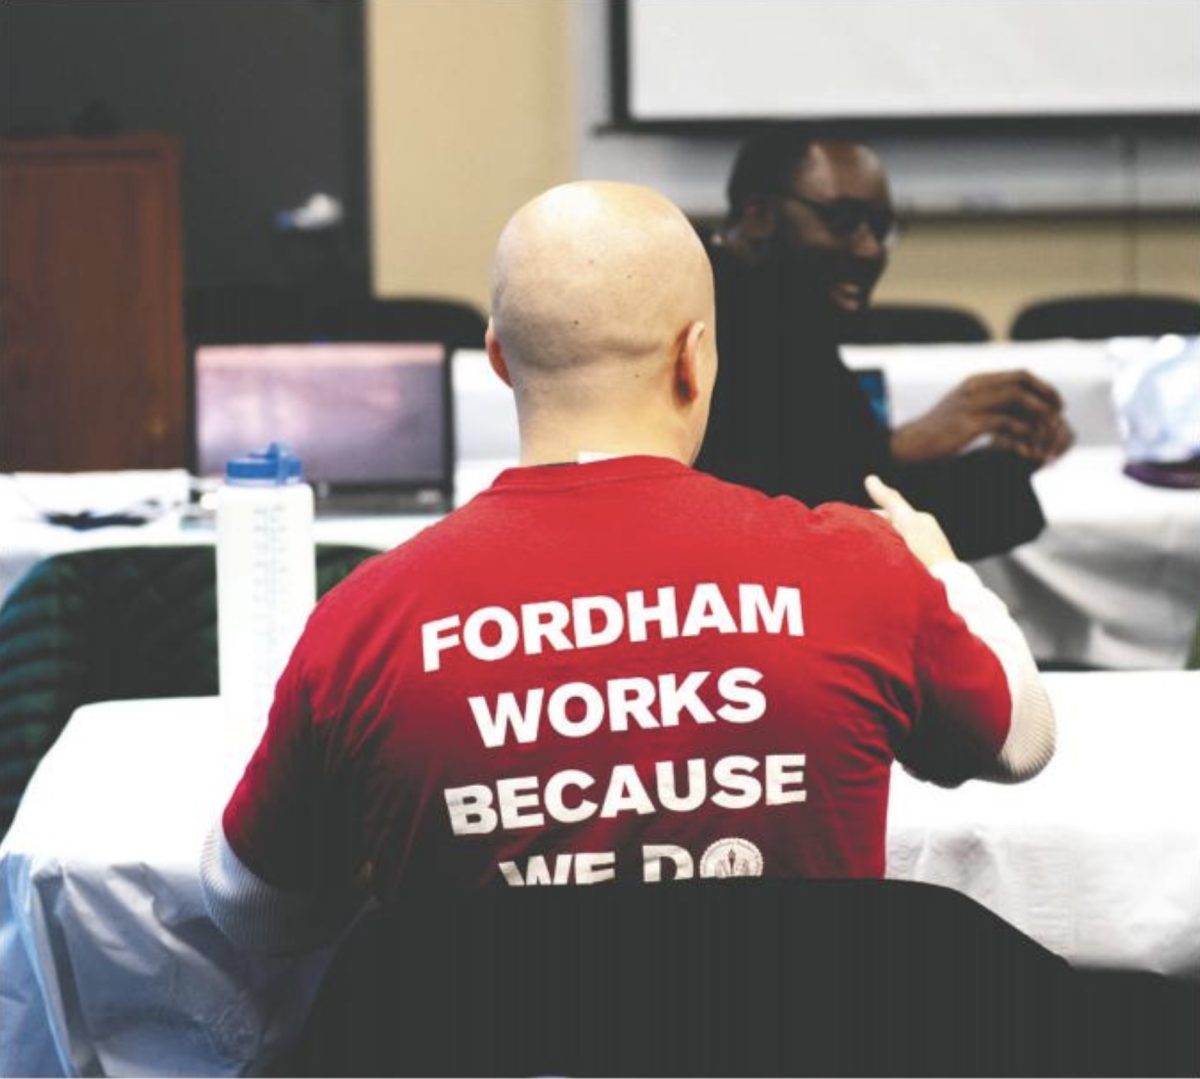 FGSW has been bargaining with the Fordham administration for 18 months. 